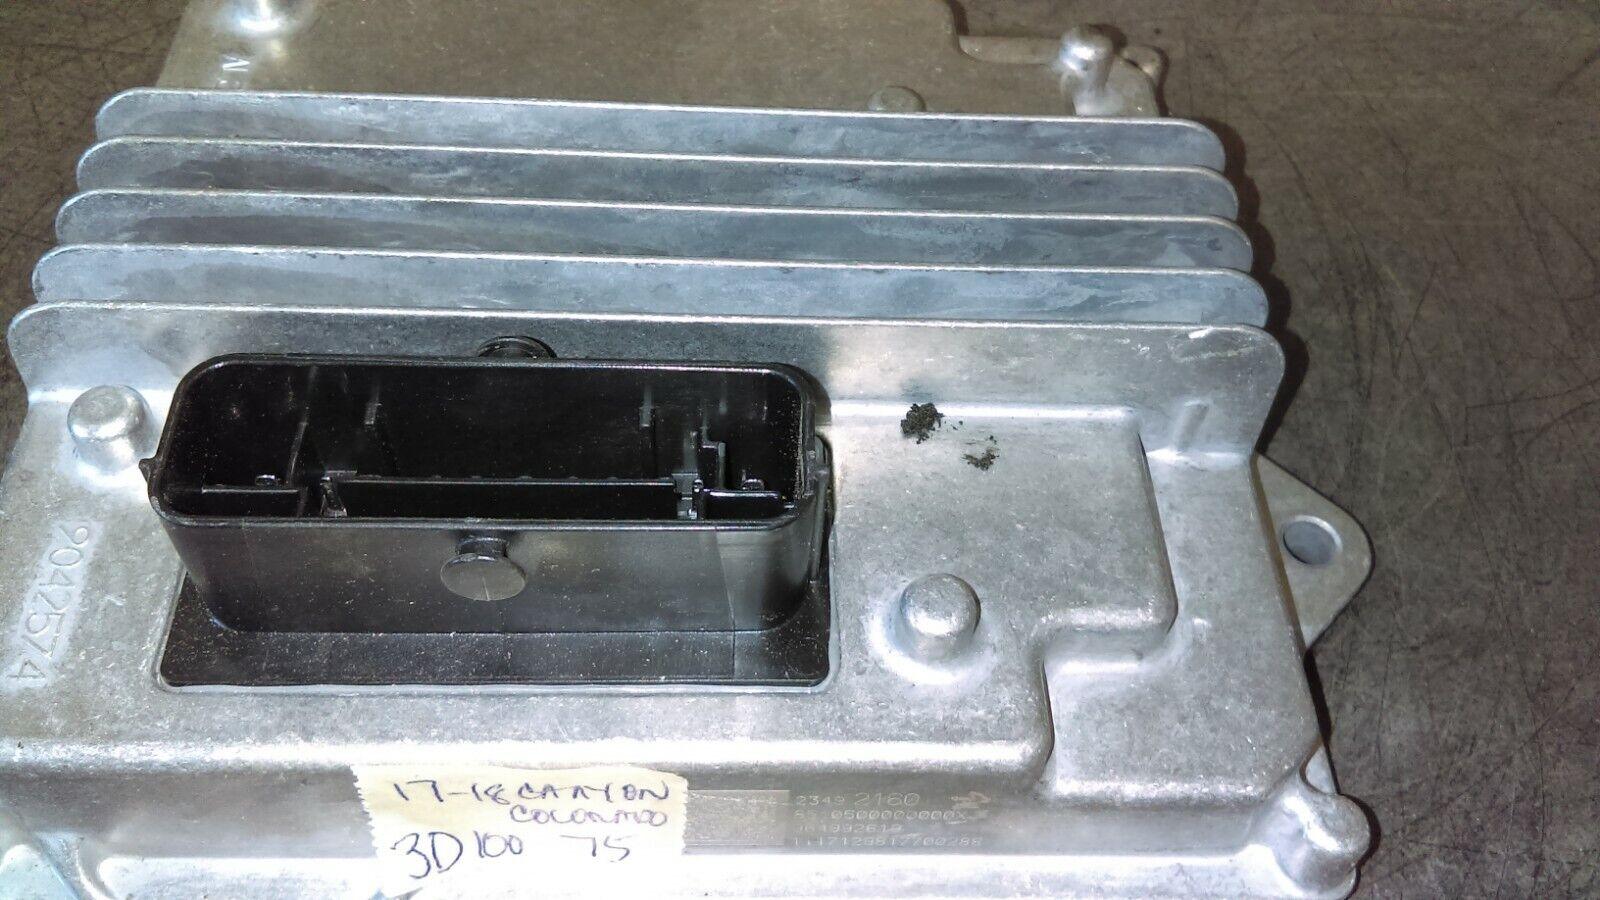 2017-2018 Chevy Colorado or Canyon chassis control module 23492160 - Swan Auto